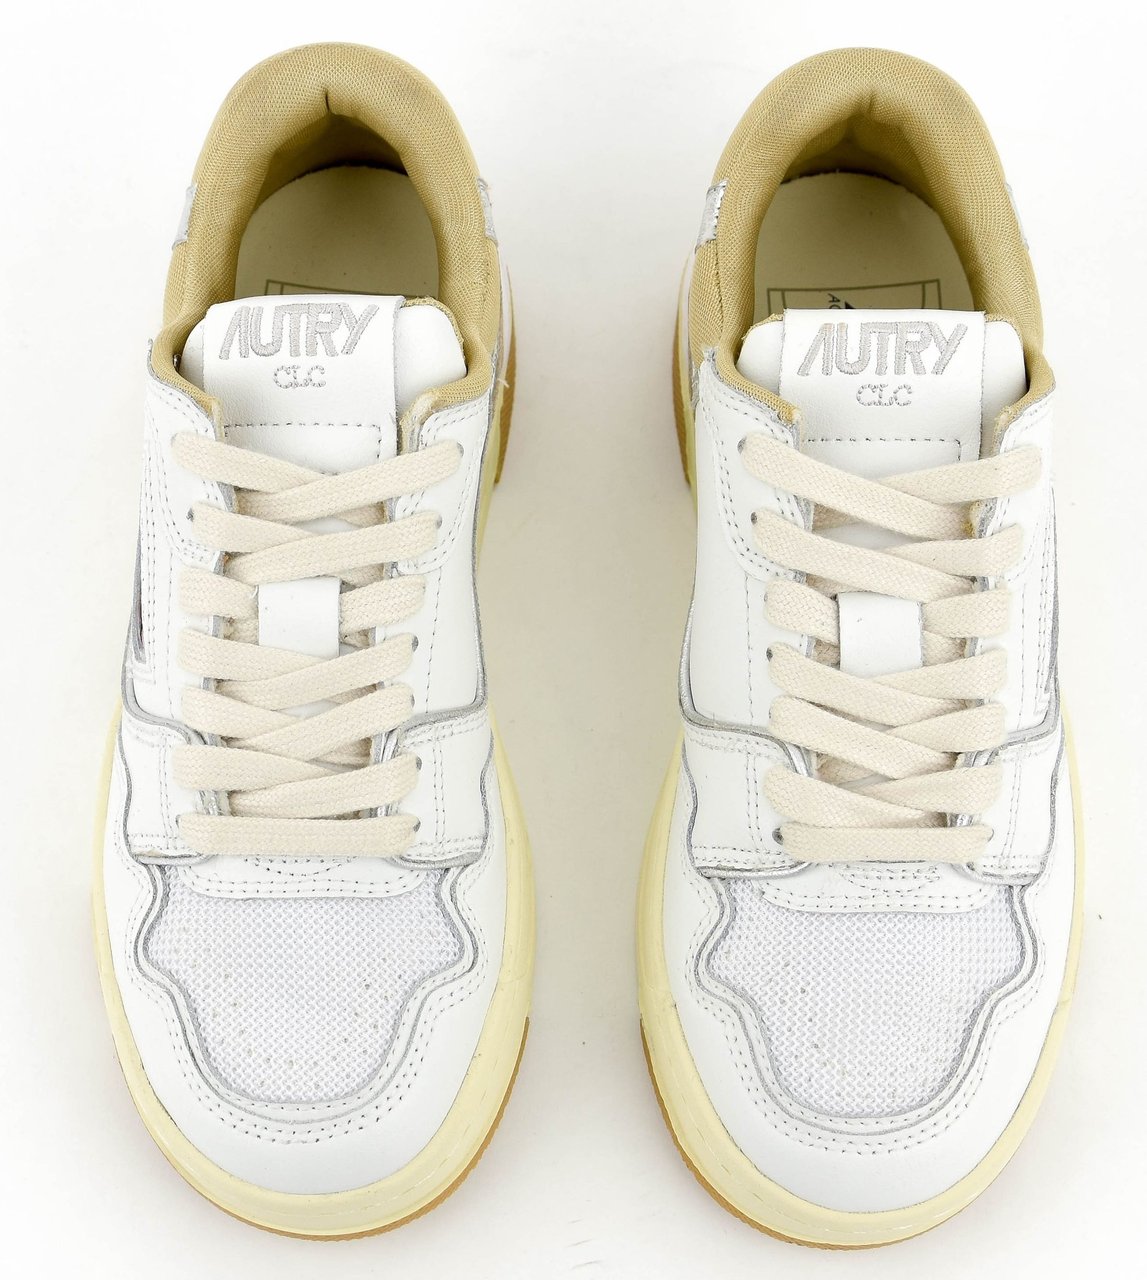 Autry Clc Sneaker White Silver Came Wit